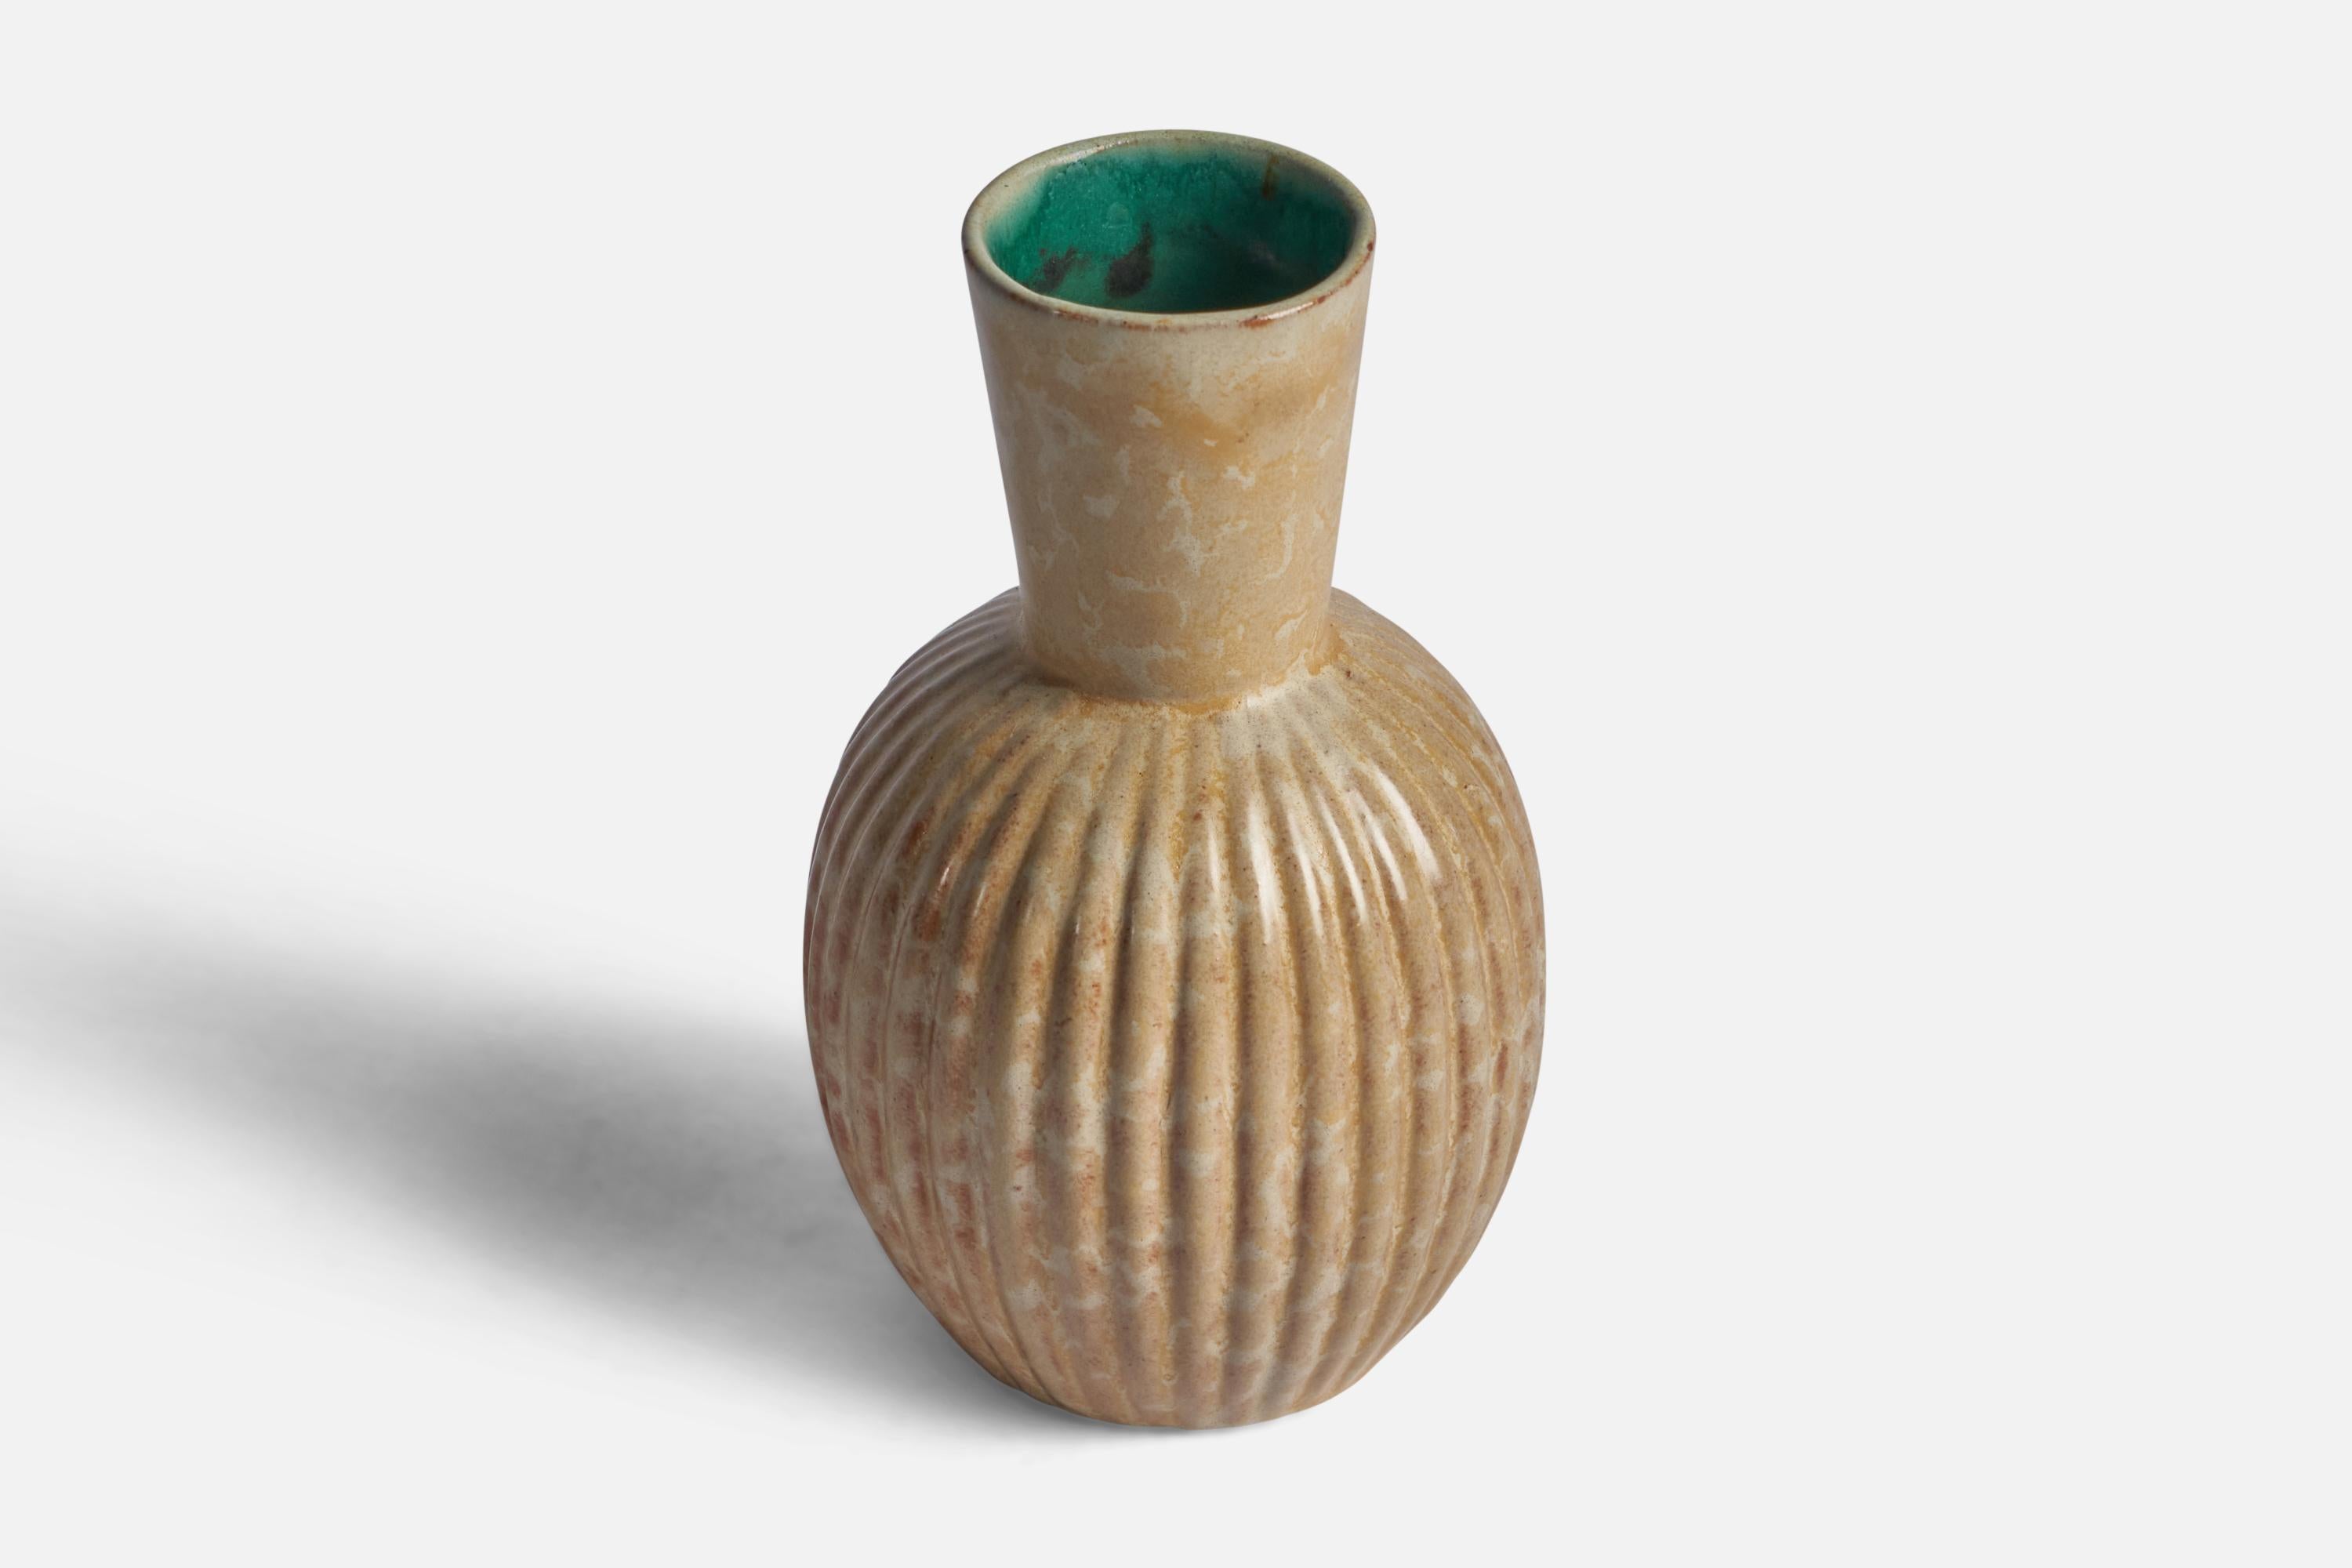 A small early modernist vase. Produced by Upsala-Ekeby, Sweden, 1940s.


Other designers of the period include Ettore Sottsass, Carl Harry Stålhane, Lisa Larsson, Axel Salto, and Arne Bang.